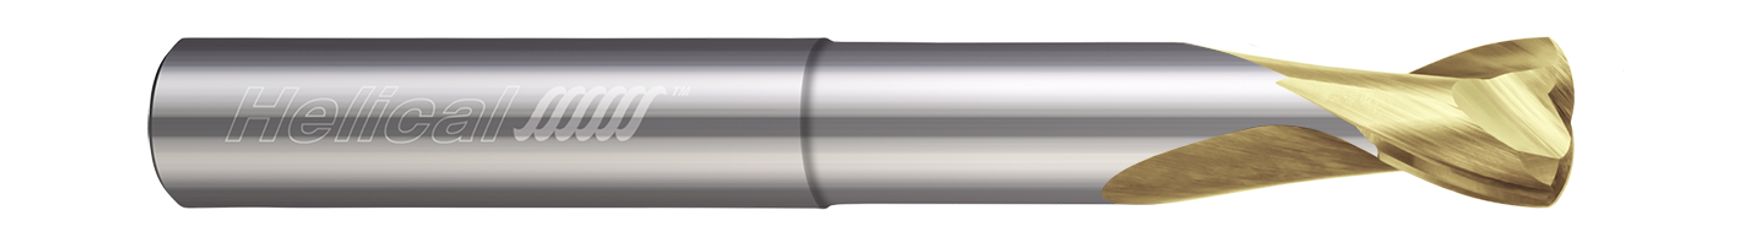 High Feed End Mills-Aluminum-Metric-Reduced Neck